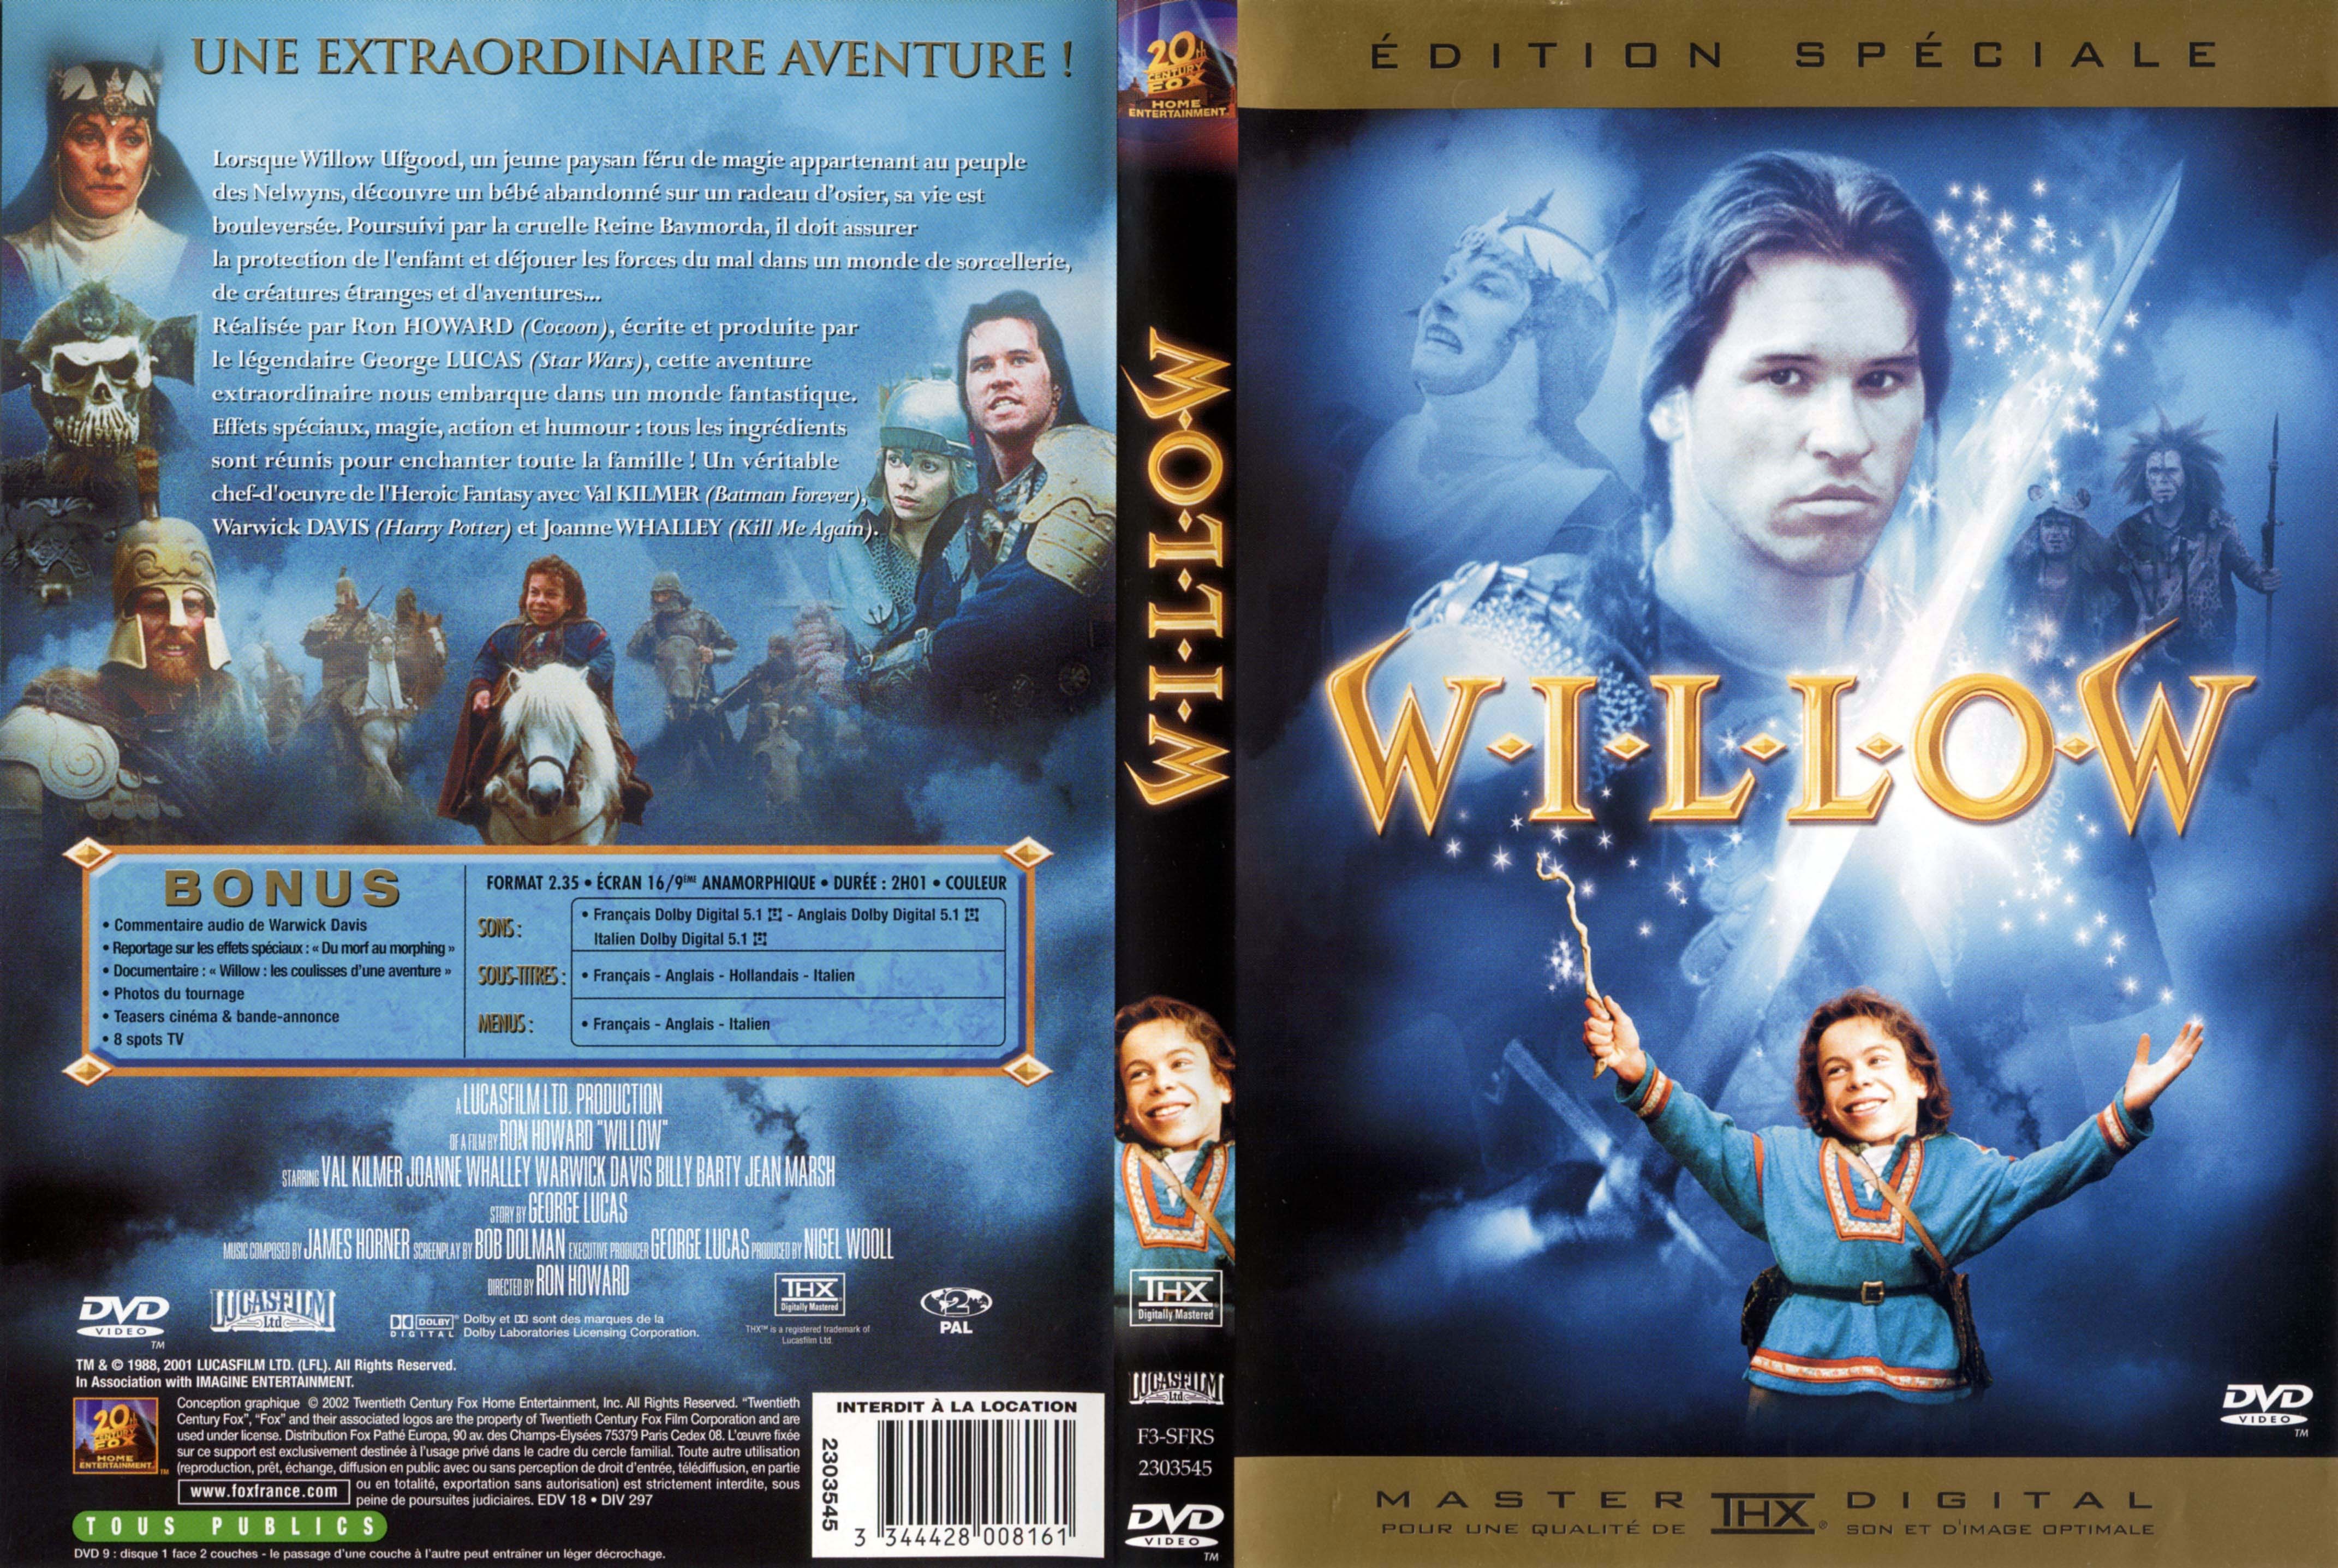 Jaquette DVD Willow